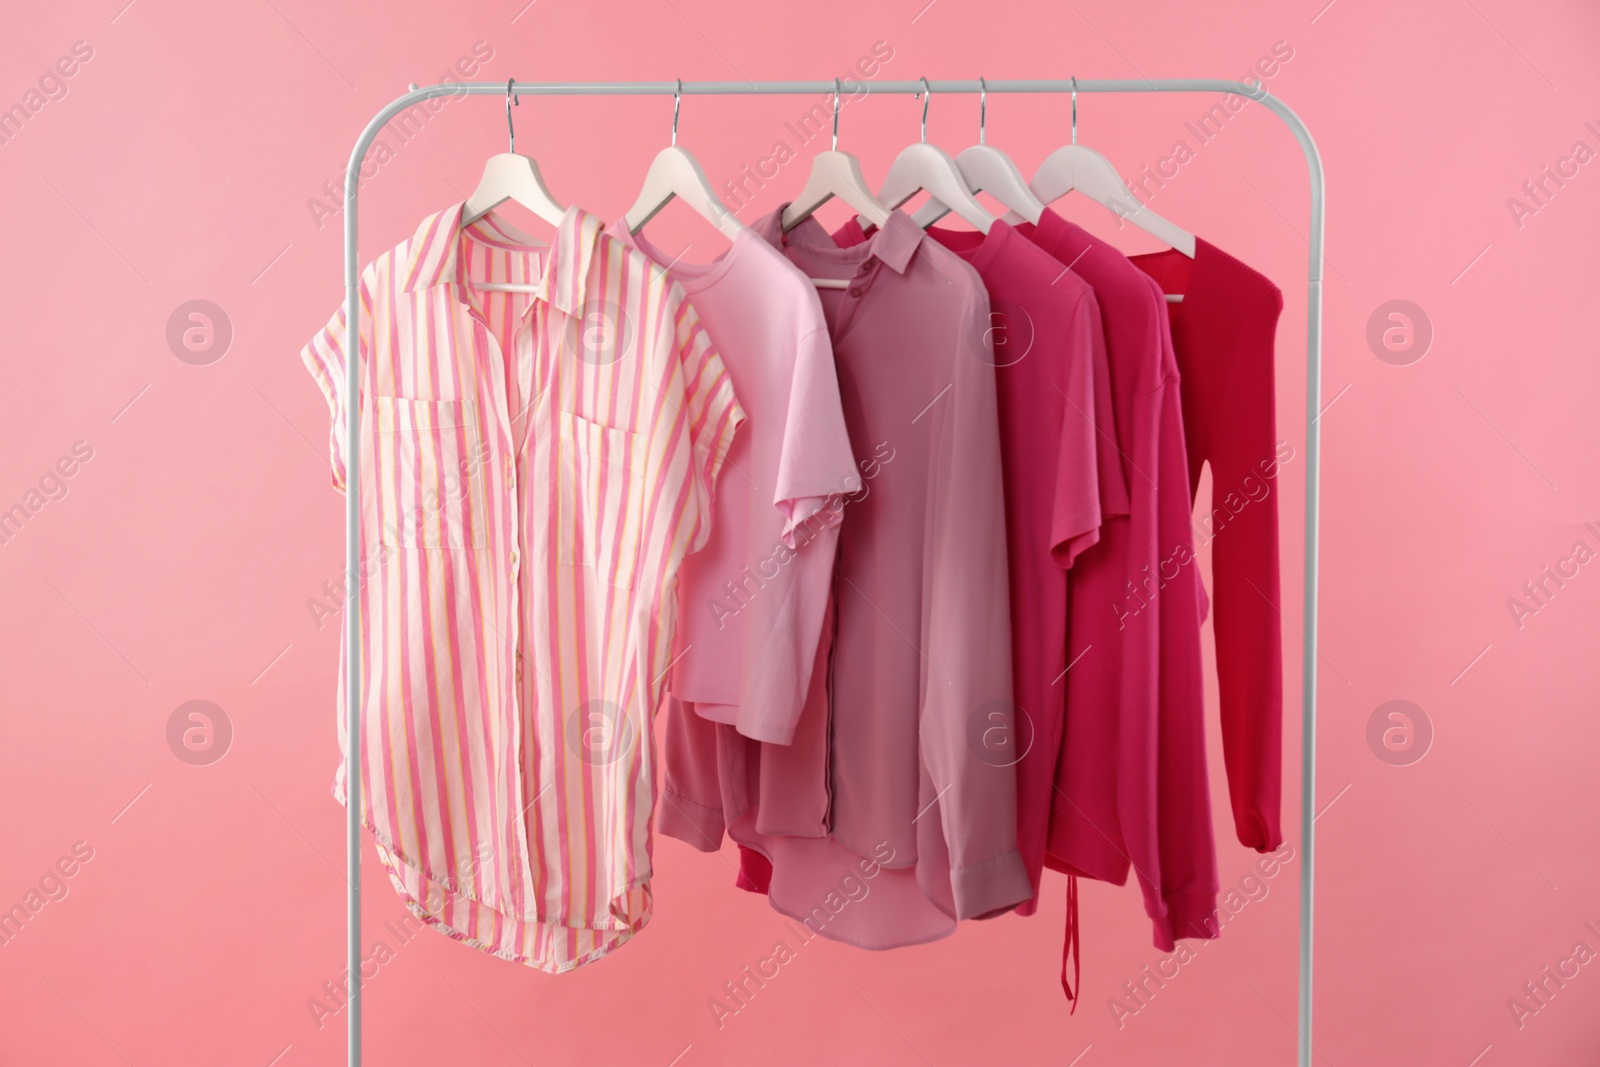 Photo of Rack with different stylish women's clothes on pink background